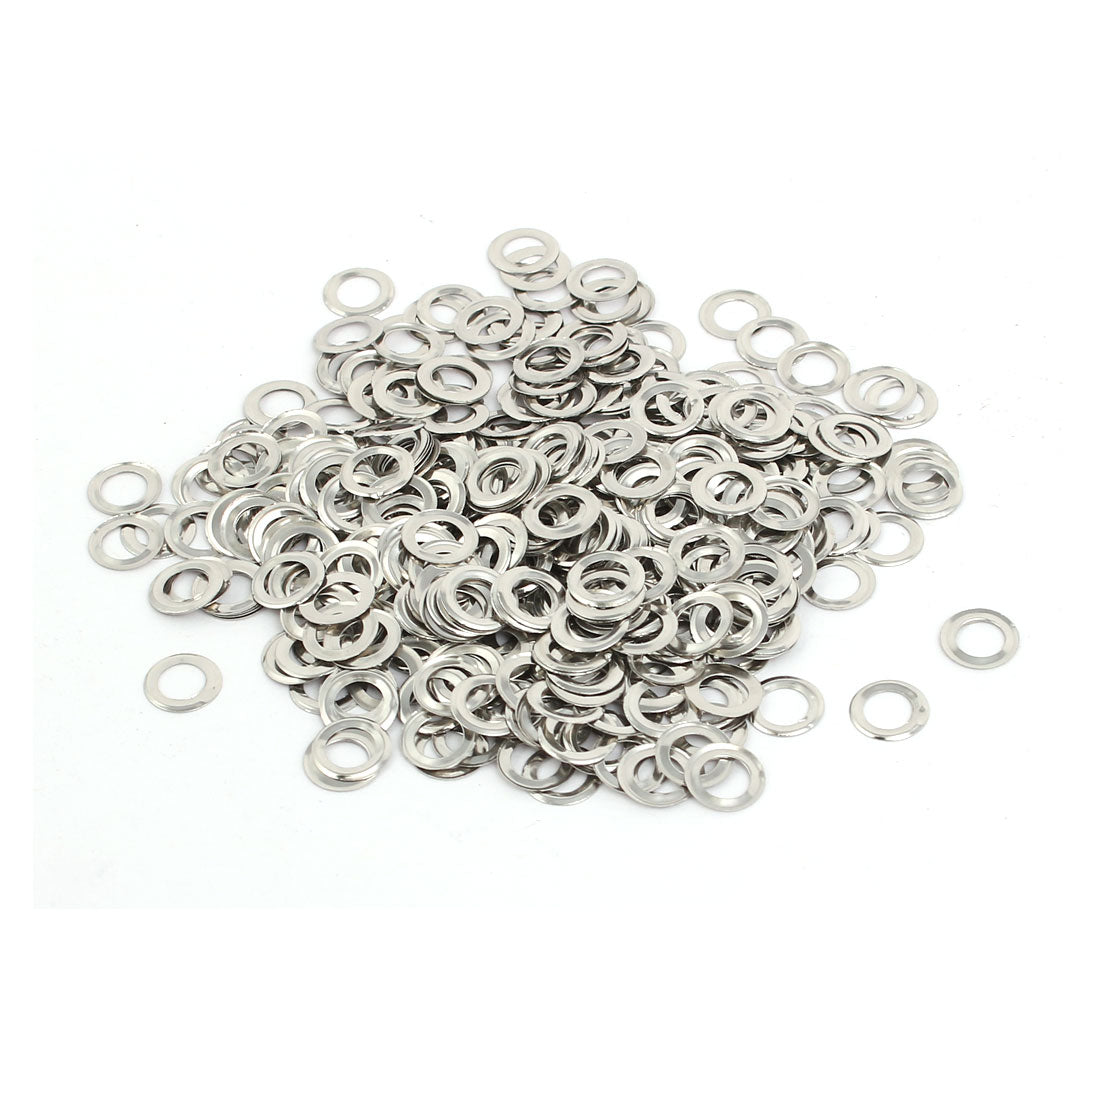 uxcell Uxcell 500pcs 4mm Inner Dia 201 Stainless Steel Eyelet Grommets Kit w Washer for Leather Canvas Clothes Shoes